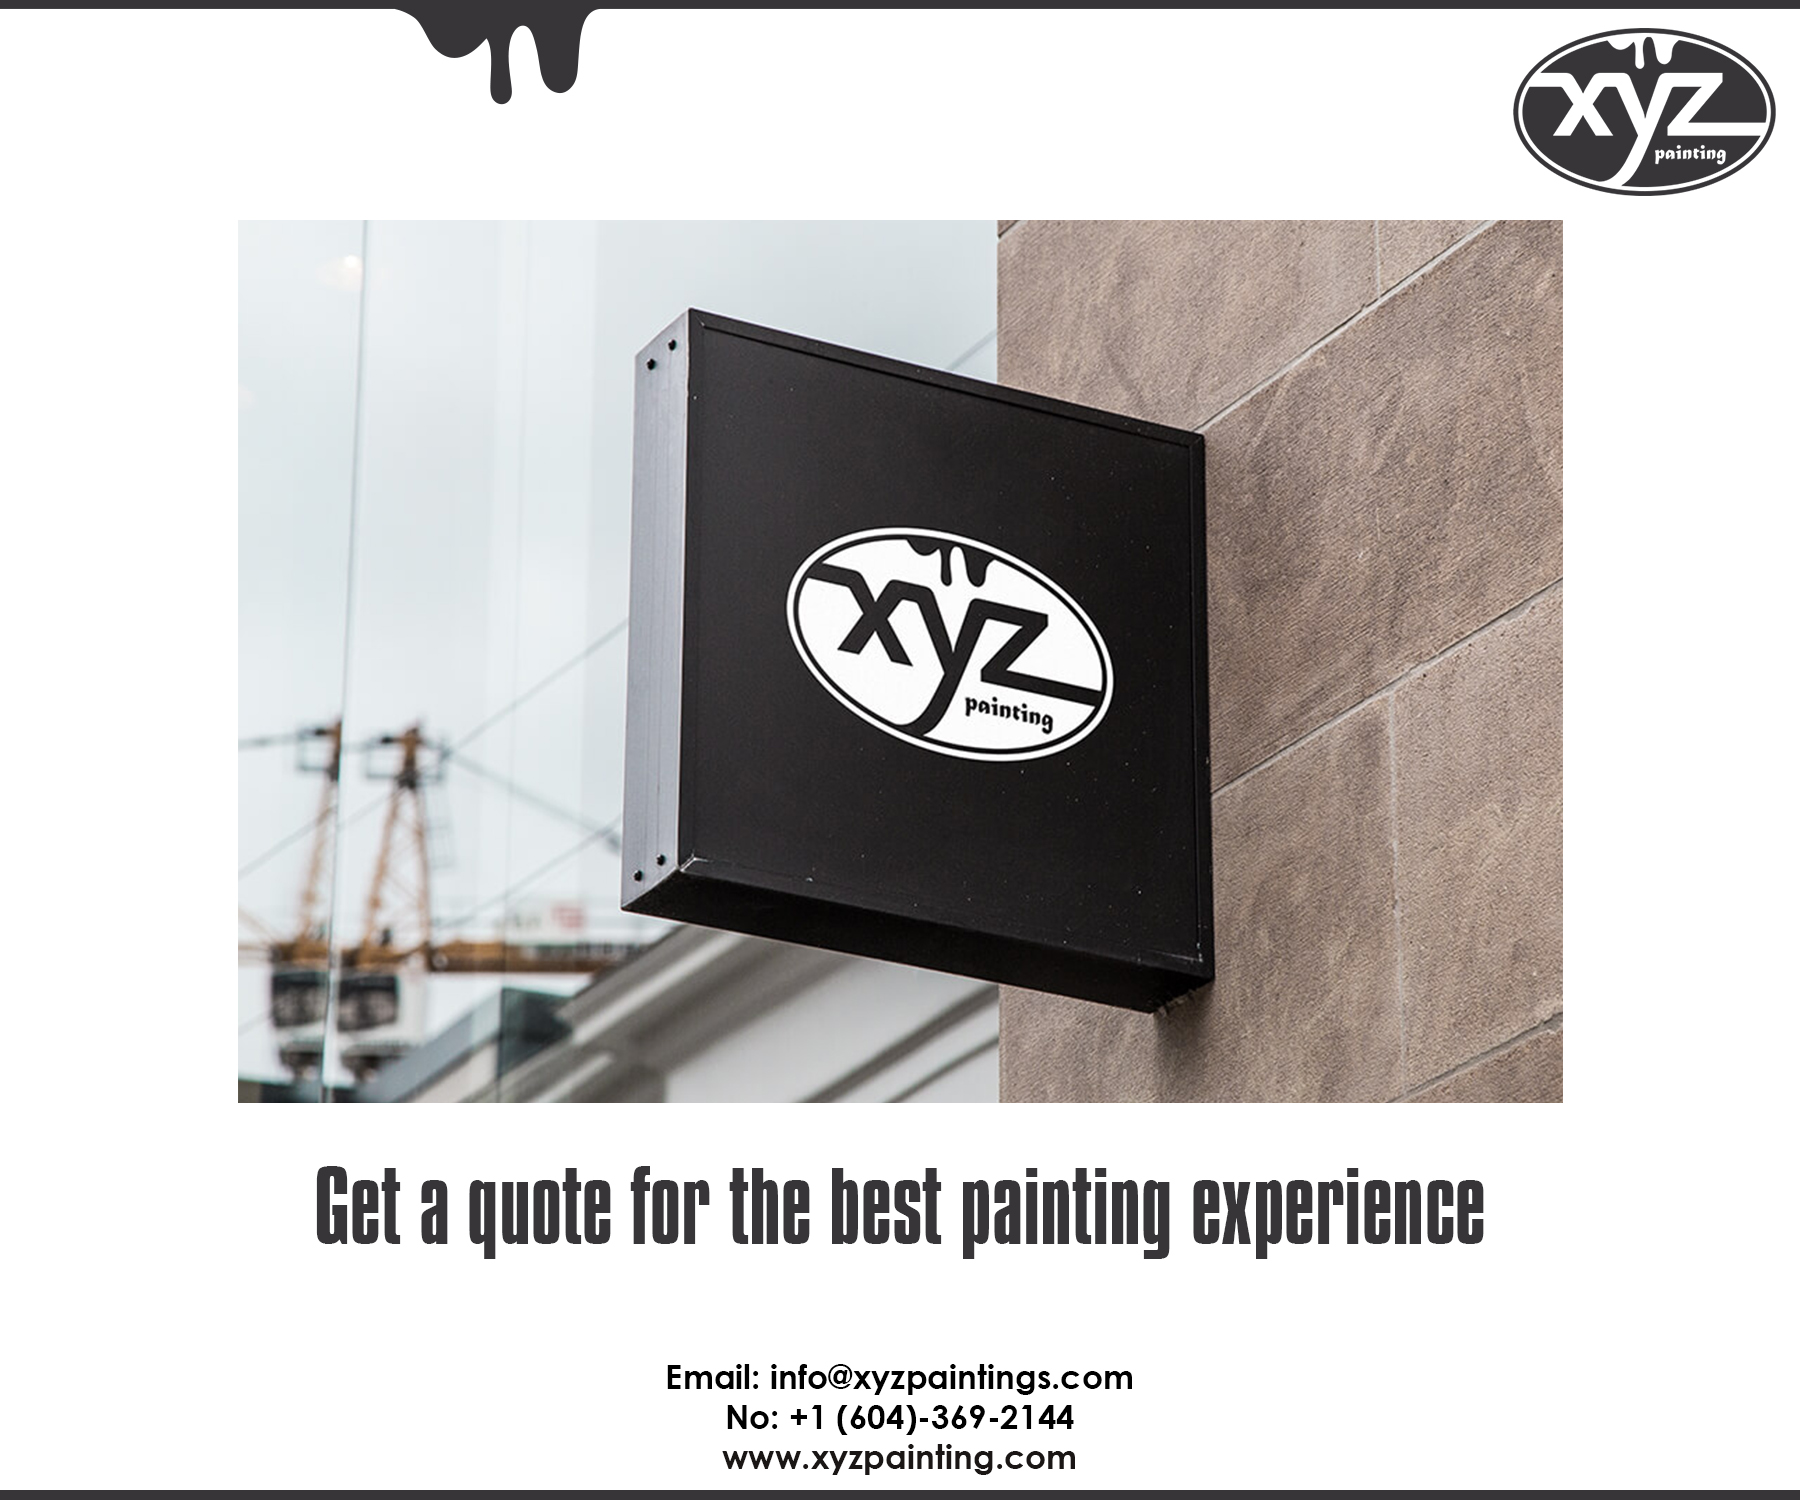 Painting Services In Vancouver - XYZ Painting